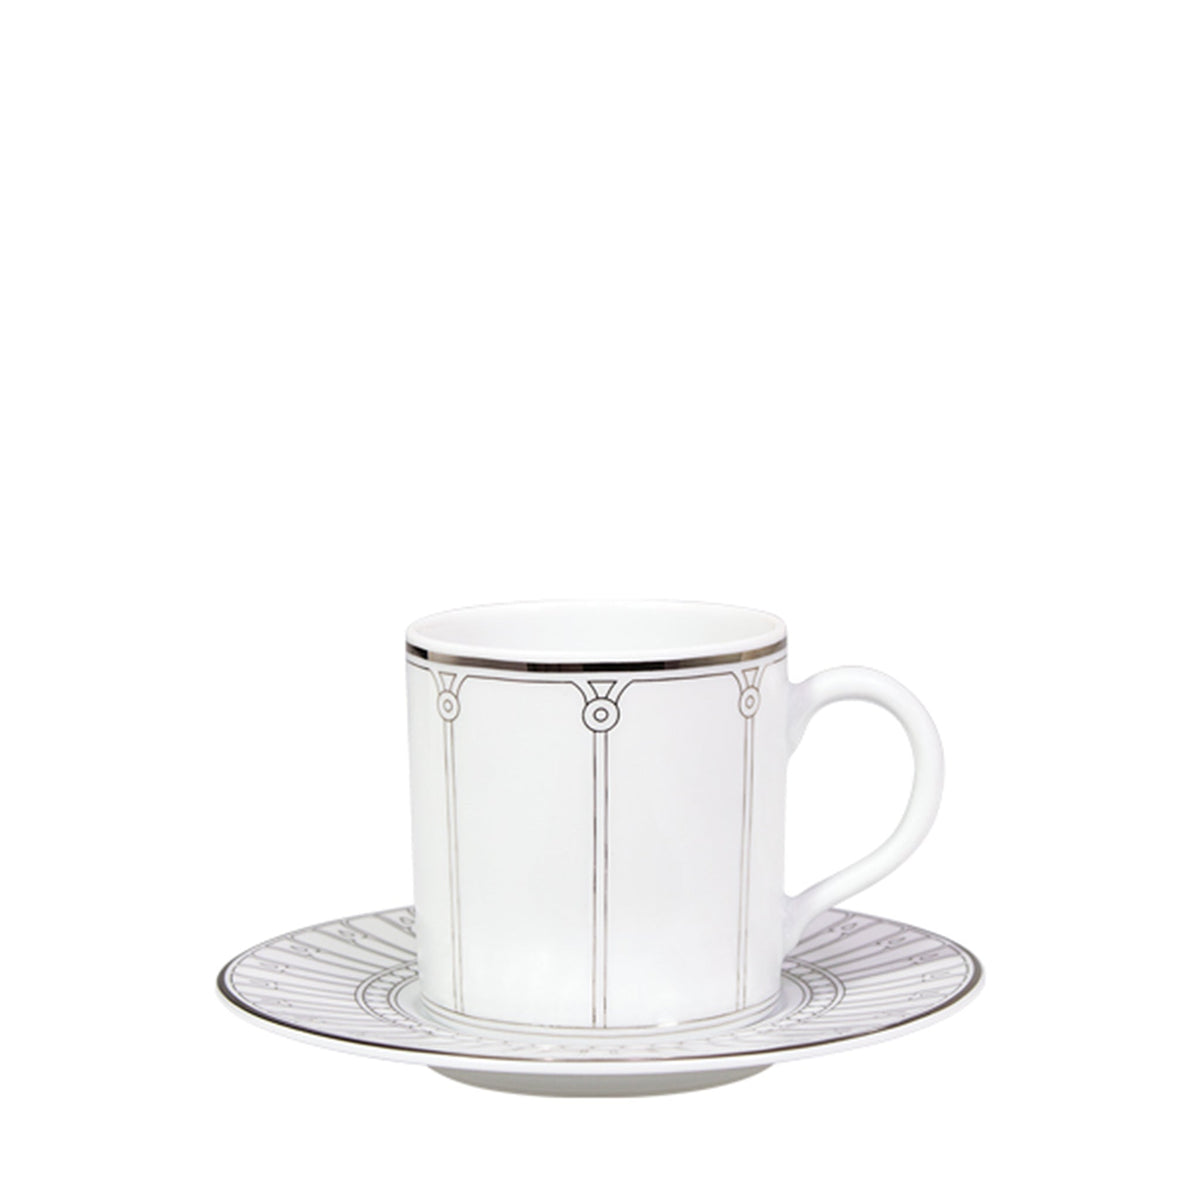 ALLEGRO COFFEE CUP & SAUCER SET OF 6